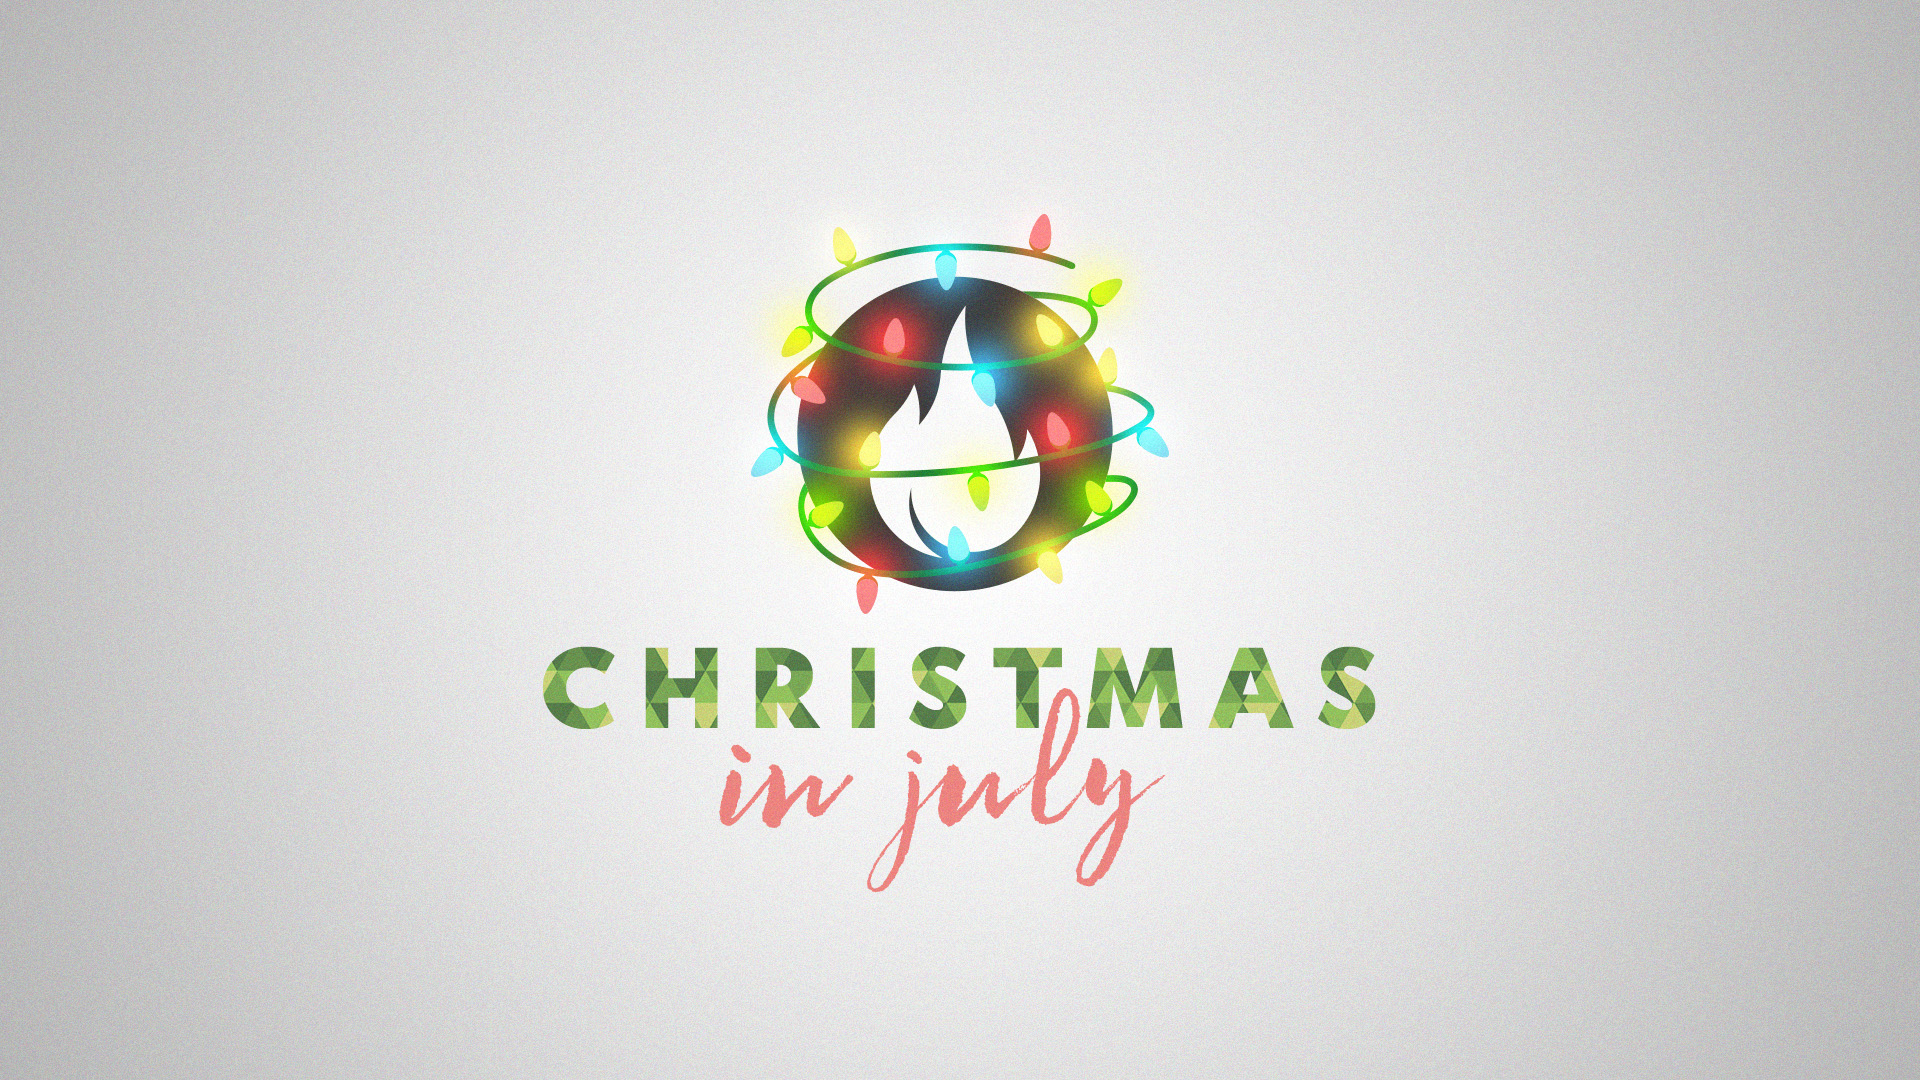 christmas in july wishes wallpaper